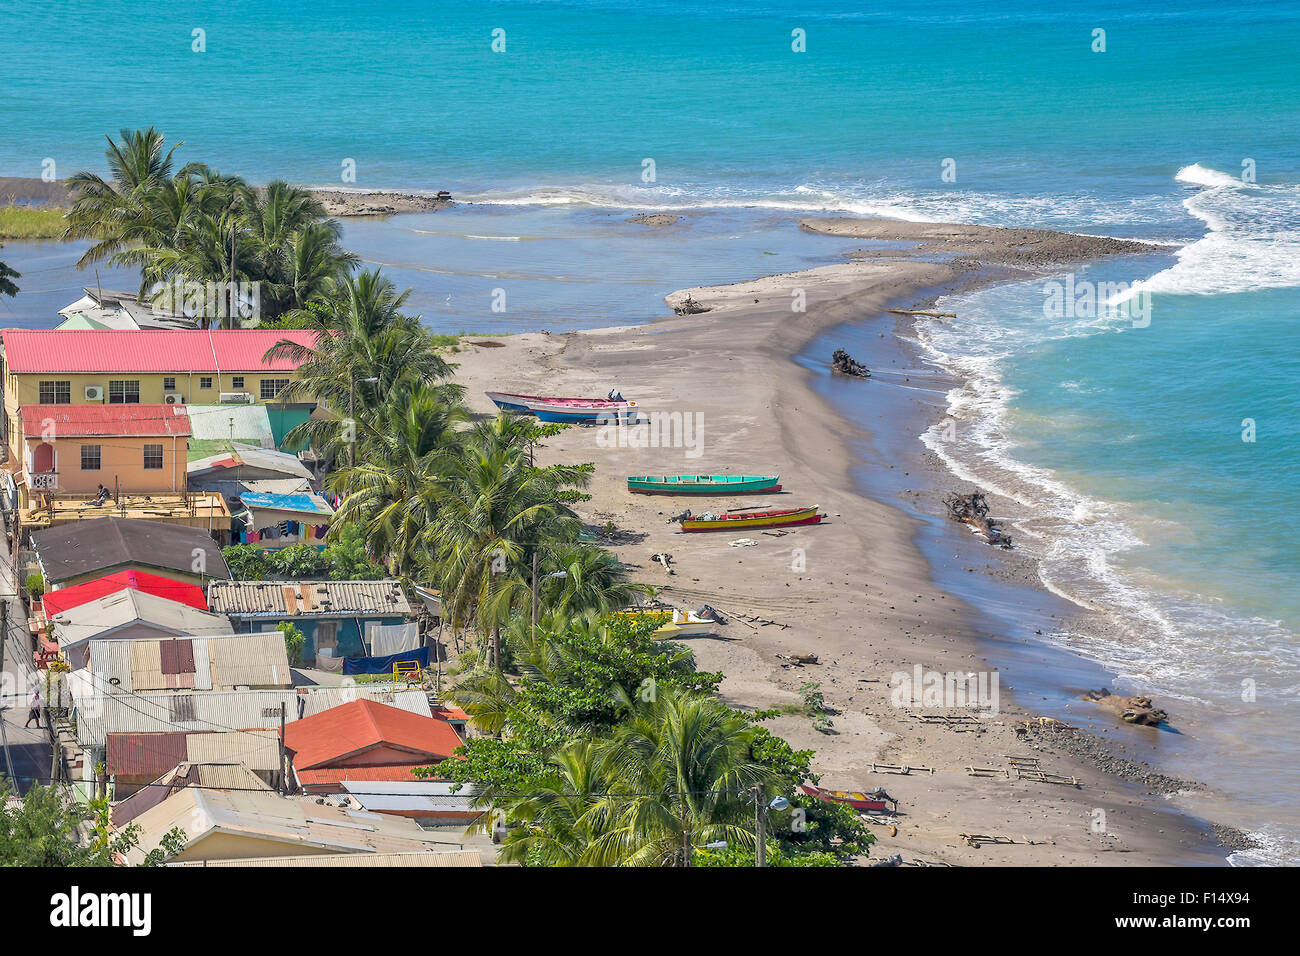 The Beach At Canaries St. Lucia West Indies Stock Photo